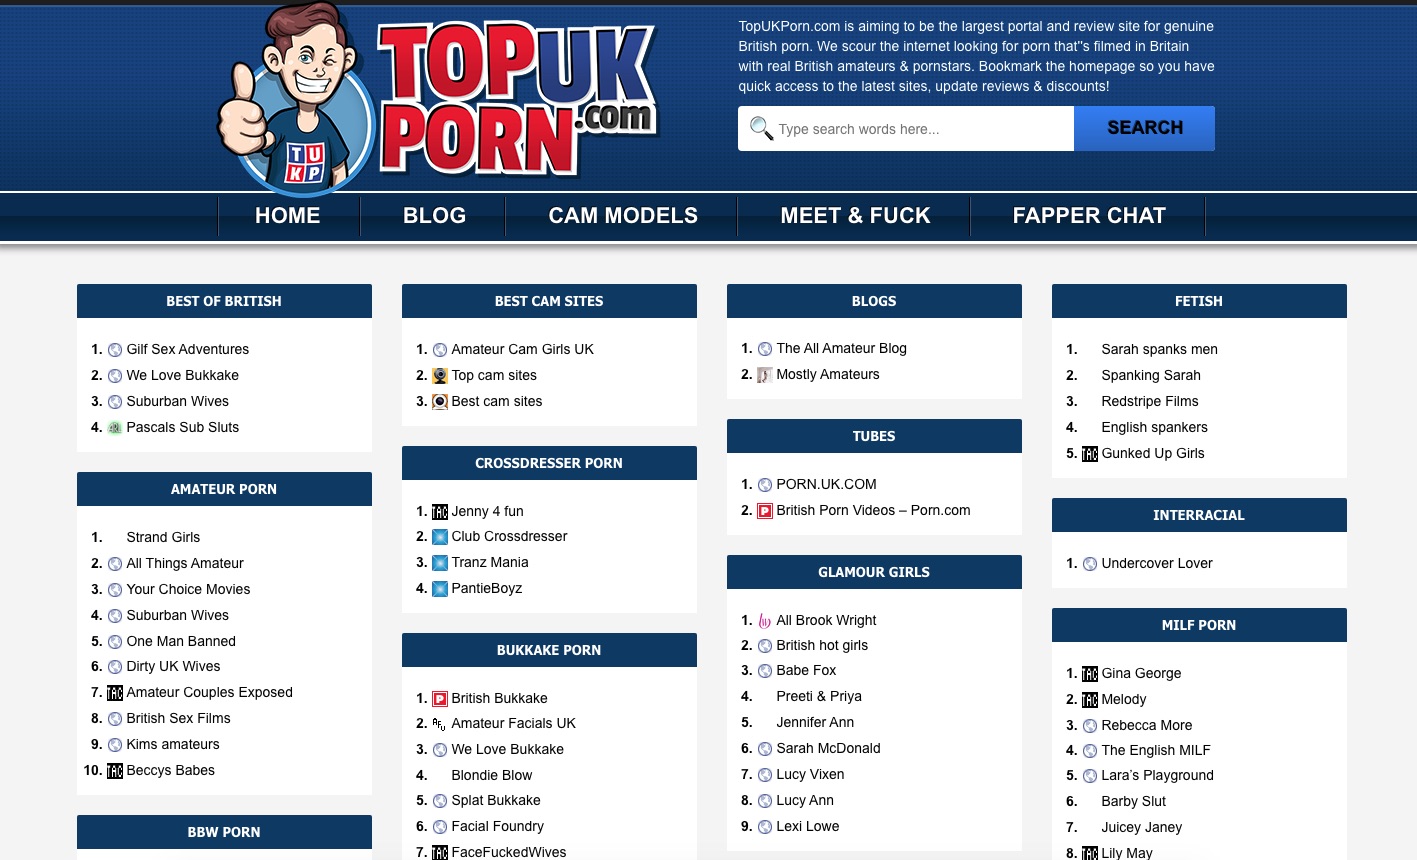 Find the best British porn sites at TopUKPorn photo